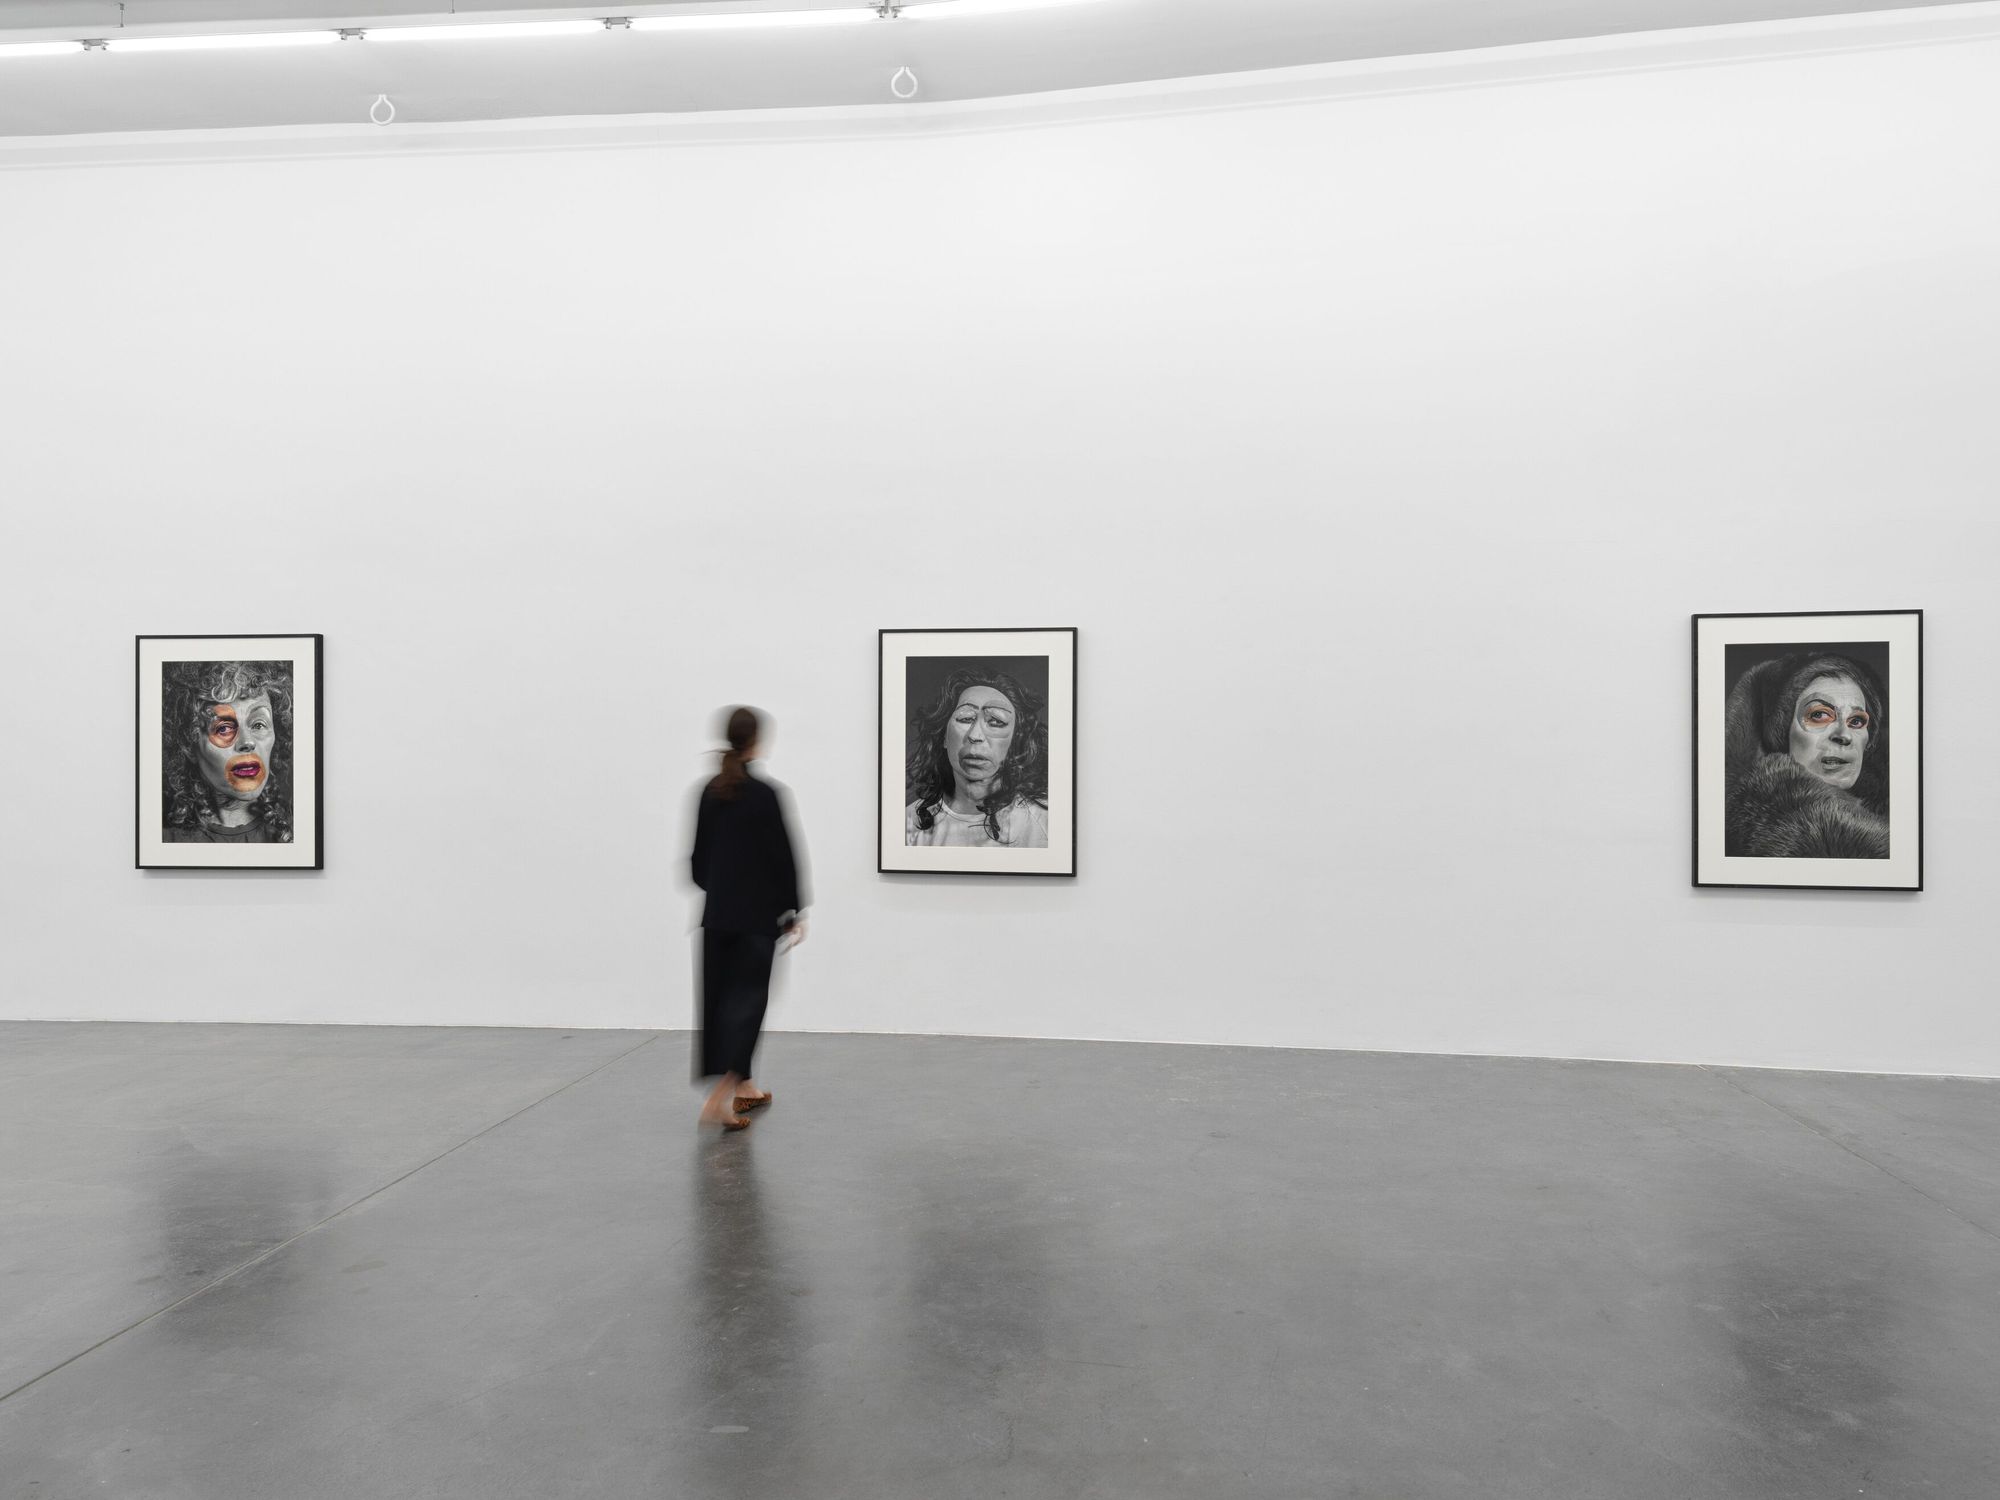 Pictures of You: Cindy Sherman at the Museum of Modern Art